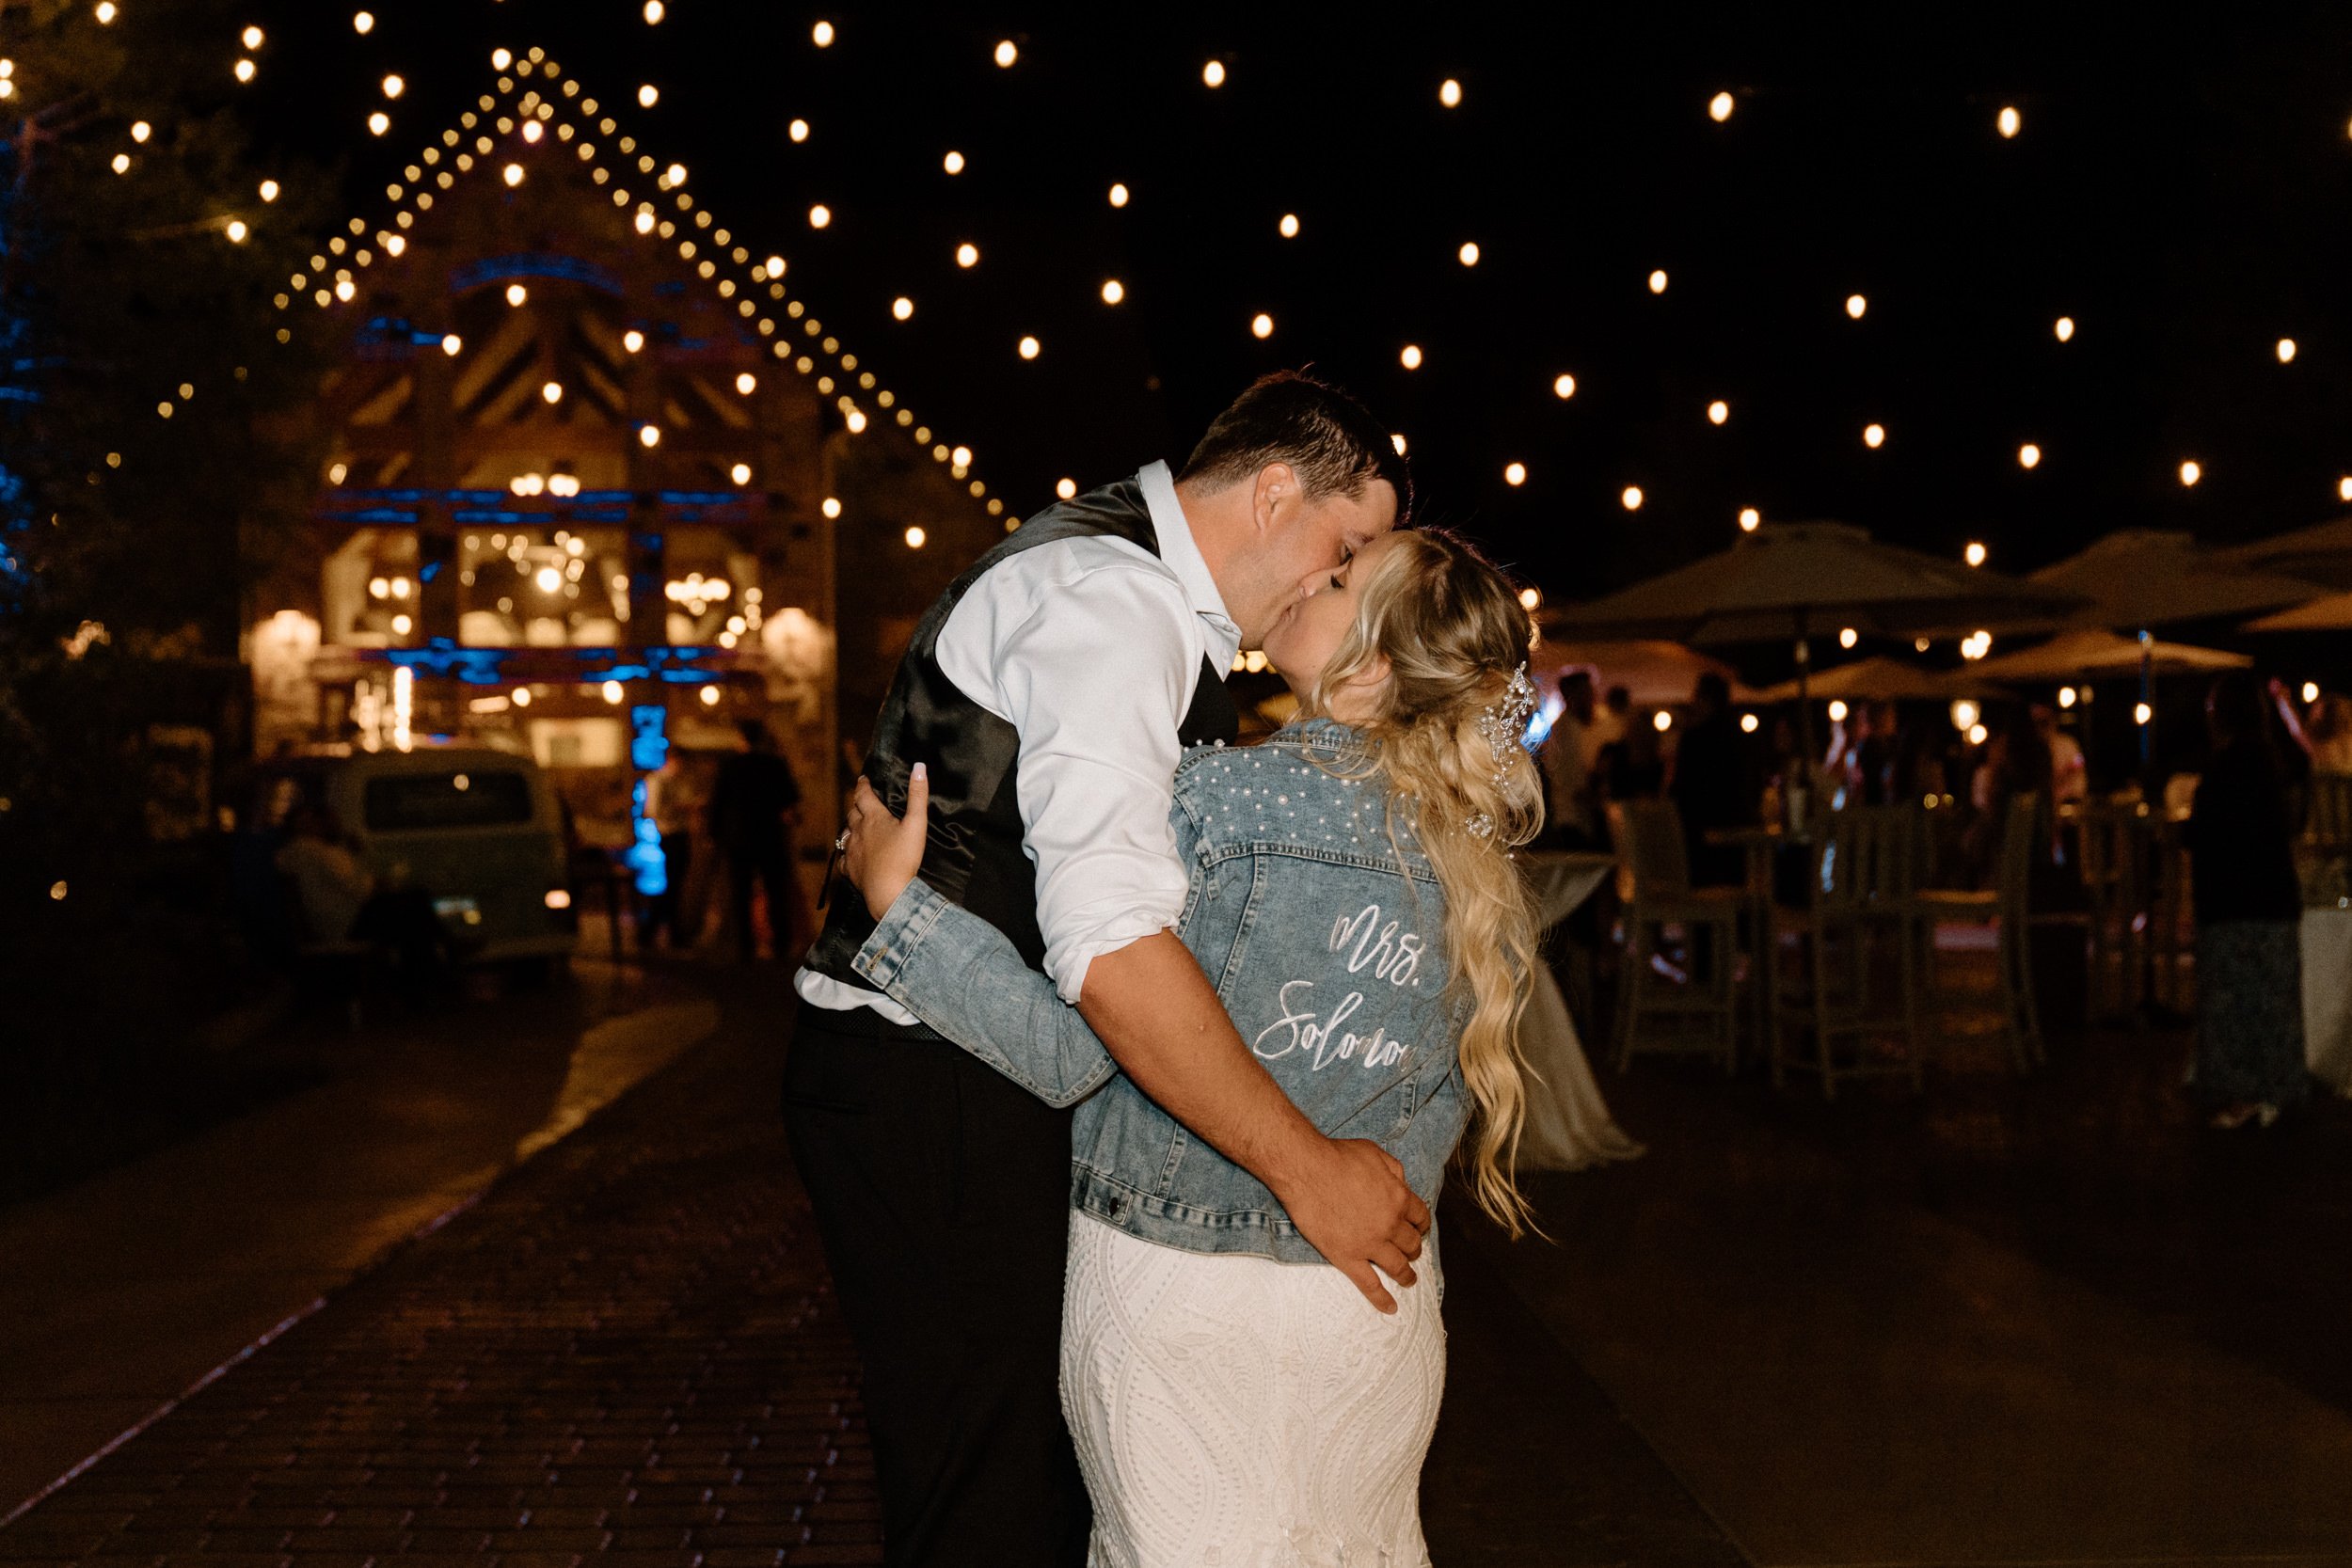 The bride and groom kiss; the bride is wearing a jean jacket that says "Mrs. Solomon" on the back